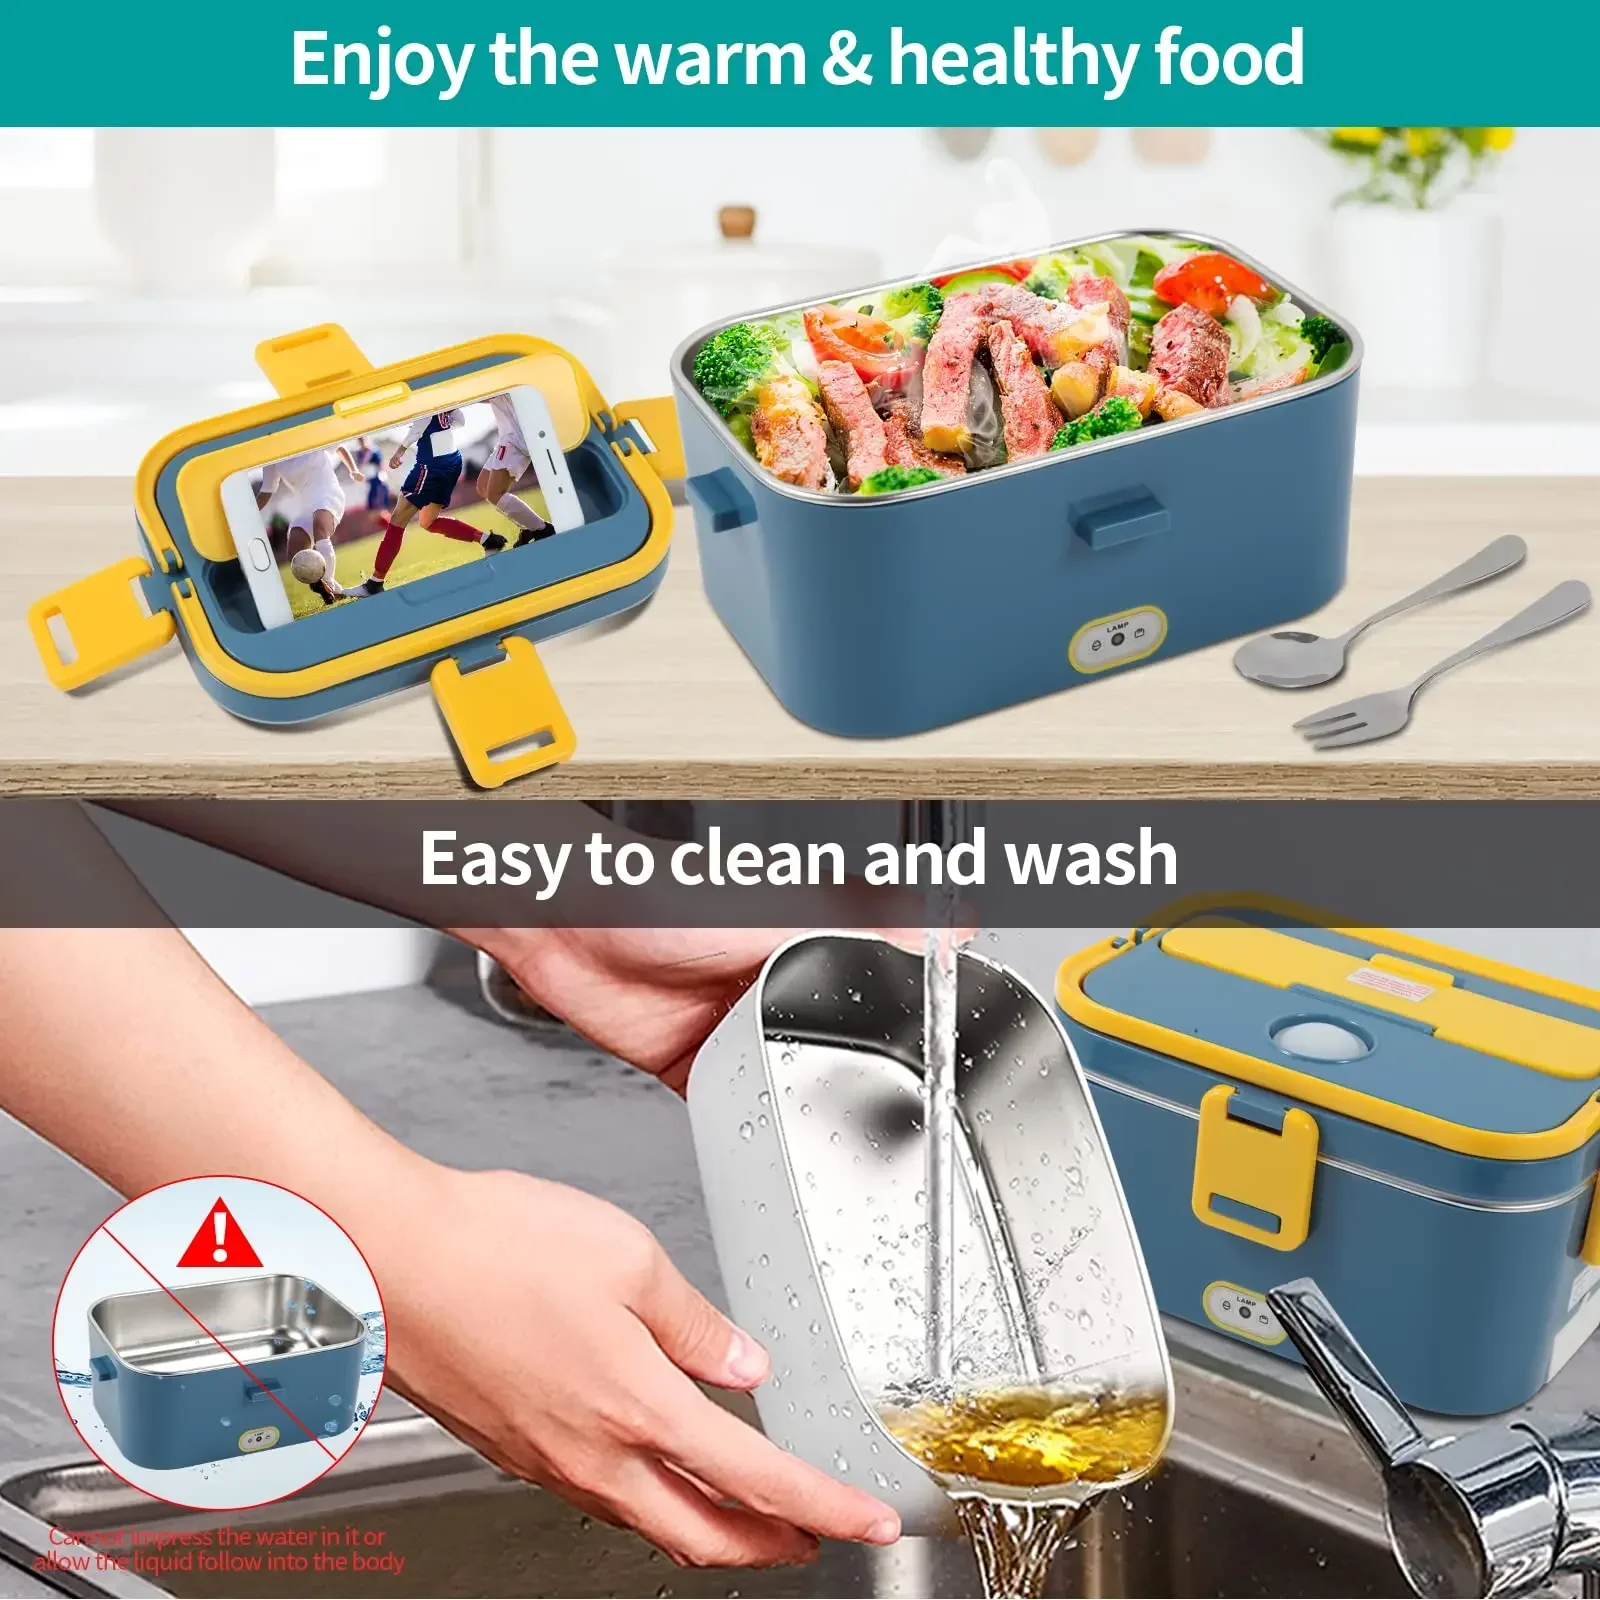 https://ae01.alicdn.com/kf/S02c030ceb13f4af5a32a4020a9499c64e/Electric-Lunch-Box-Food-Warmer-Portable-Food-Heater-for-Car-Home-Leak-Proof-Lunch-Heating-Stainless.jpg